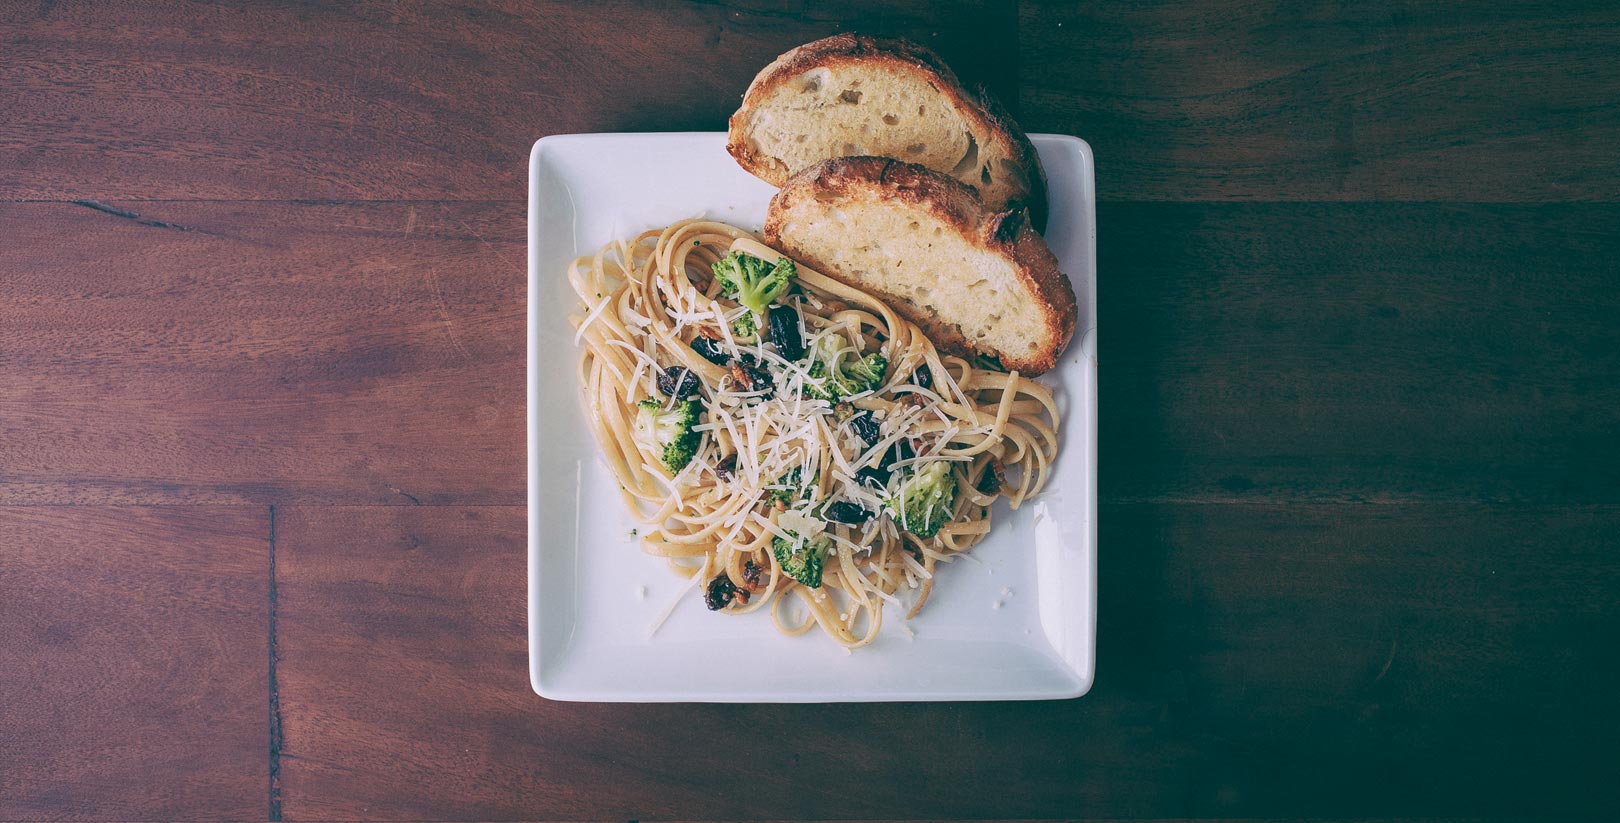 A Lingering Sentiment for Linguine, Garlic, Broccoli & Anchovies